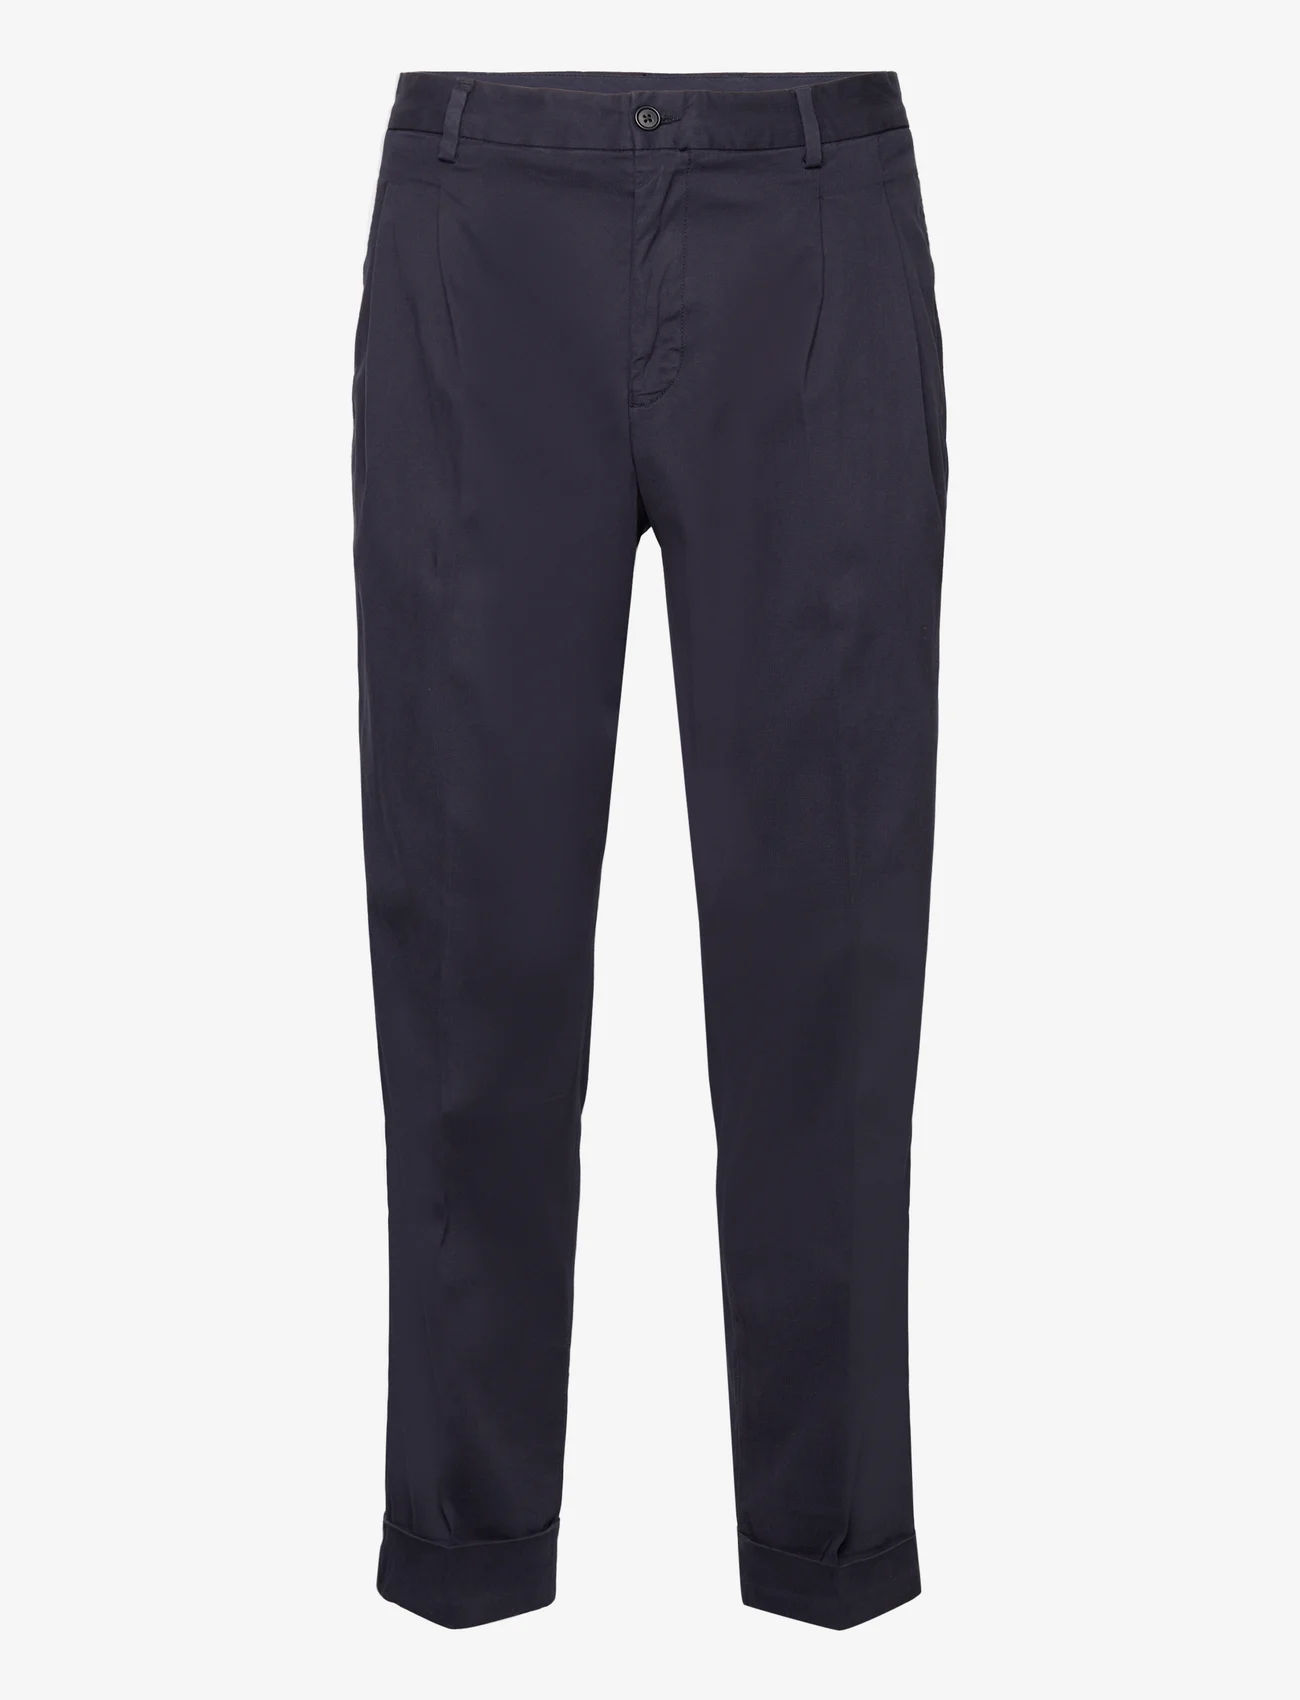 GANT - RELAXED TAPERED COTTON SUIT PANTS - „chino“ stiliaus kelnės - evening blue - 0